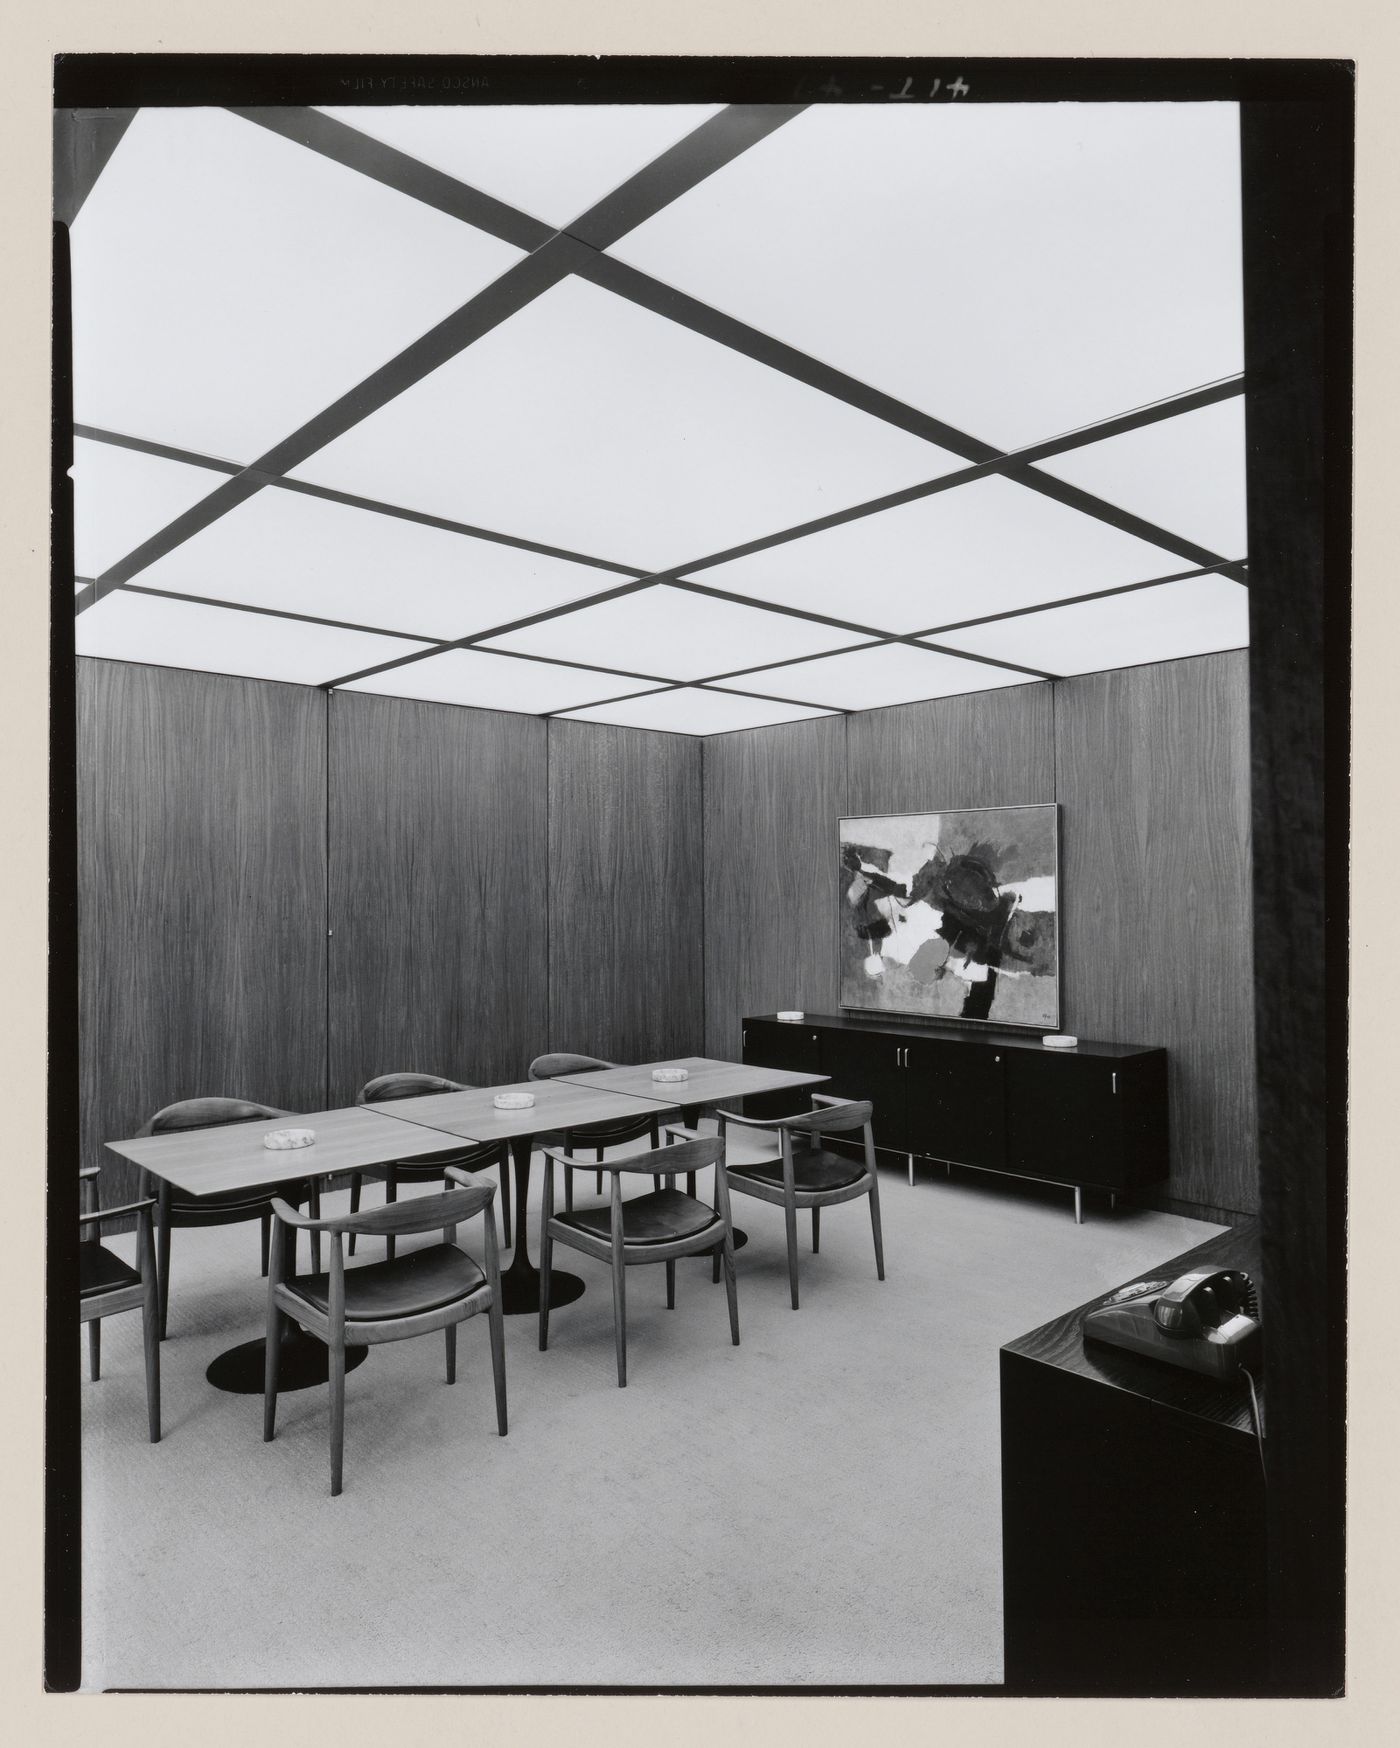 Interior view of the Seagram Building showing furniture and the recessed light fixtures designed by Richard Kelly, New York City